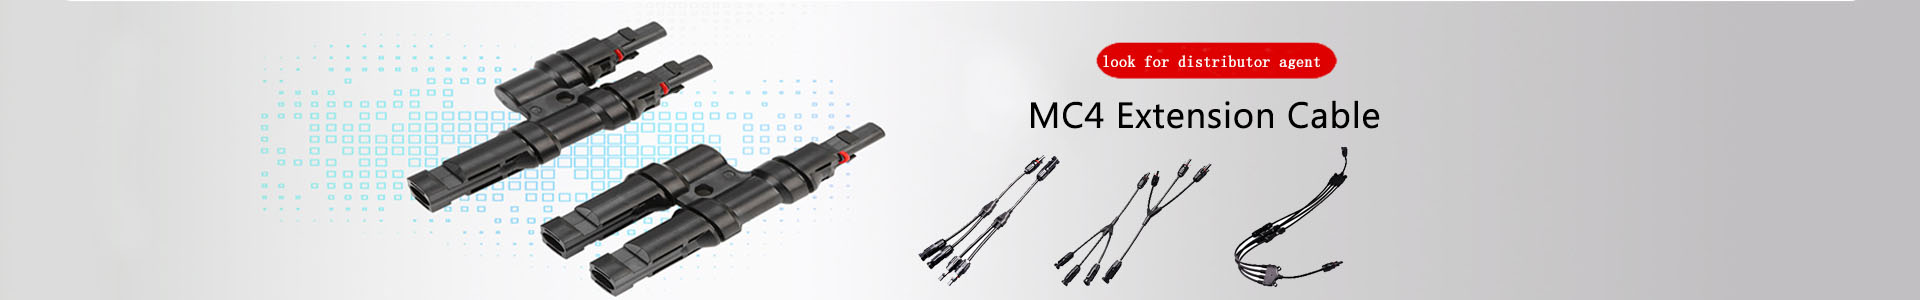 10 precautions for PV module installation-Industry news-Solar | solar connector,solar branch connector,diode fuse connector,MC4 extnsion cable,H1Z2Z2 solar cable, UL4703 solar cable | Leading manufacturer and supplier of solar pv cables and connectors